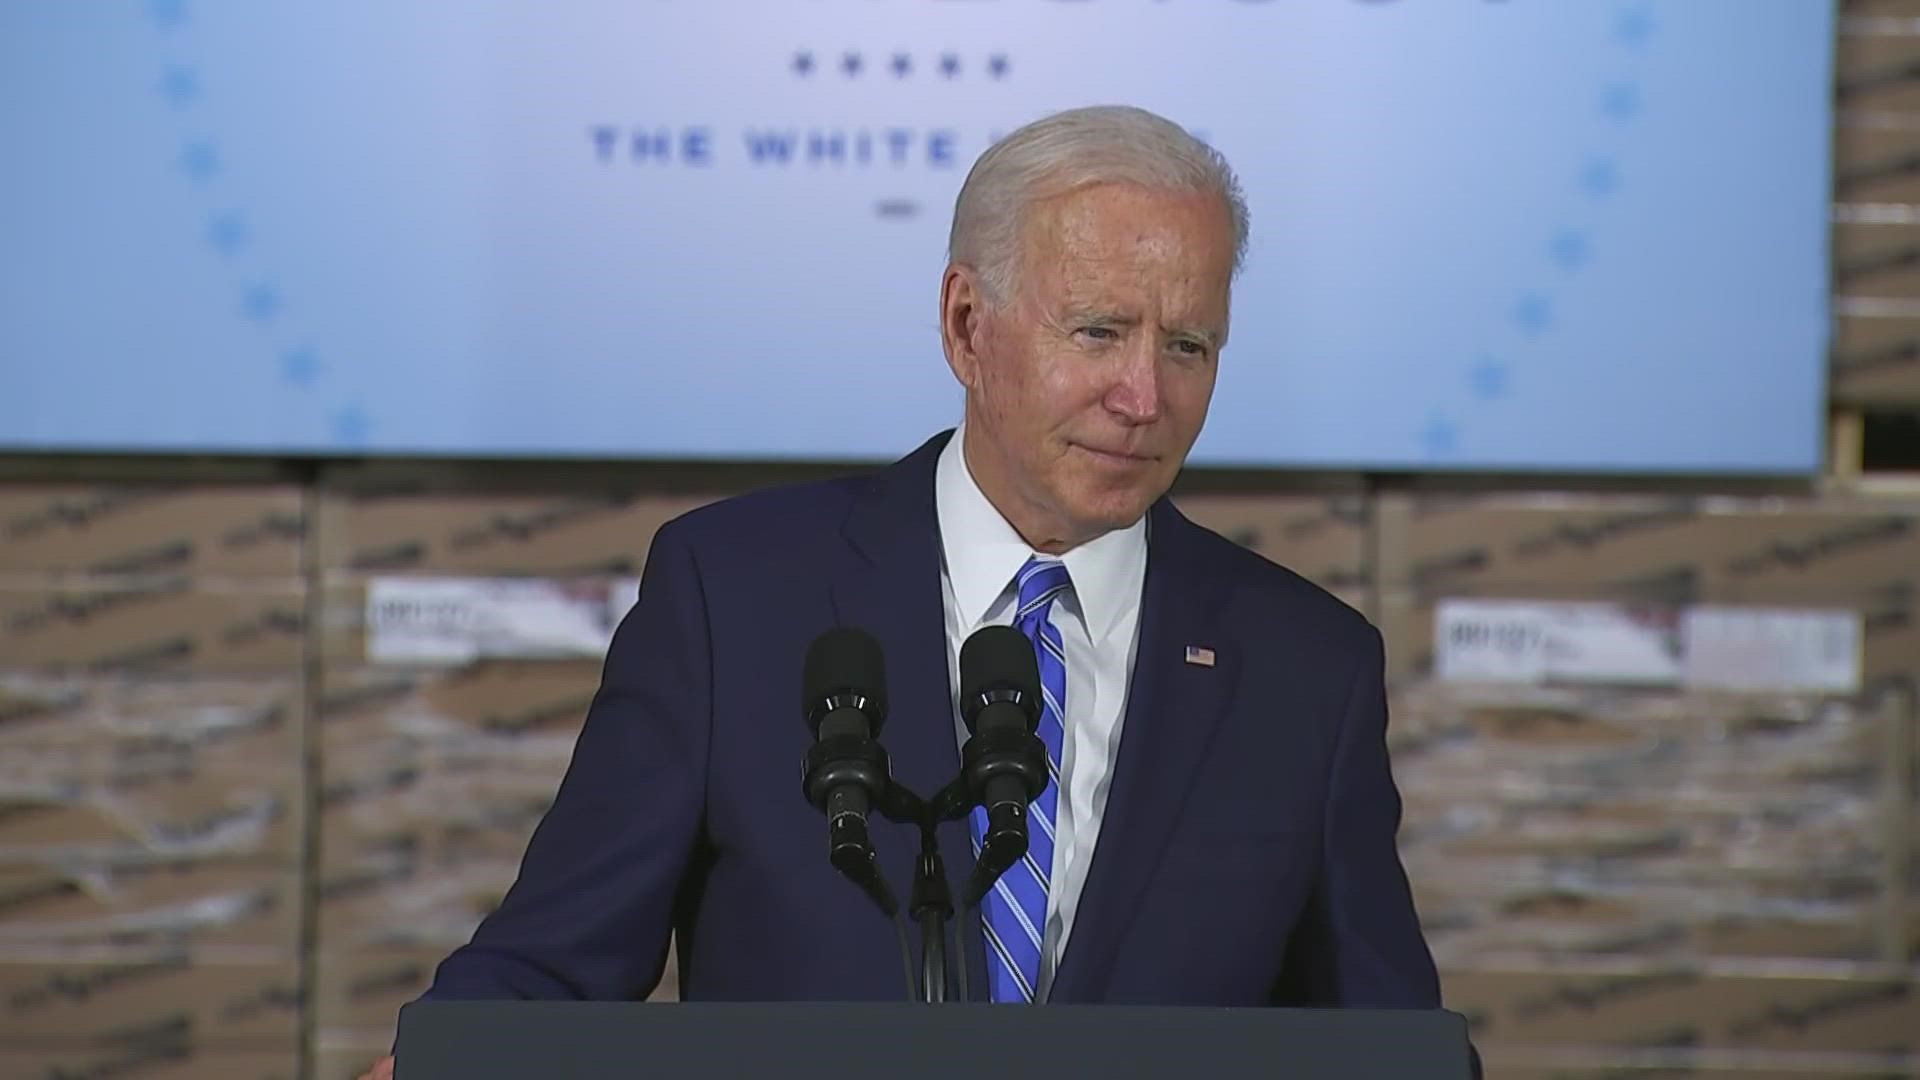 Biden is promoting vaccine requirements across the country in an effort to get the roughly 67 million unvaccinated American adults to roll up their sleeves.